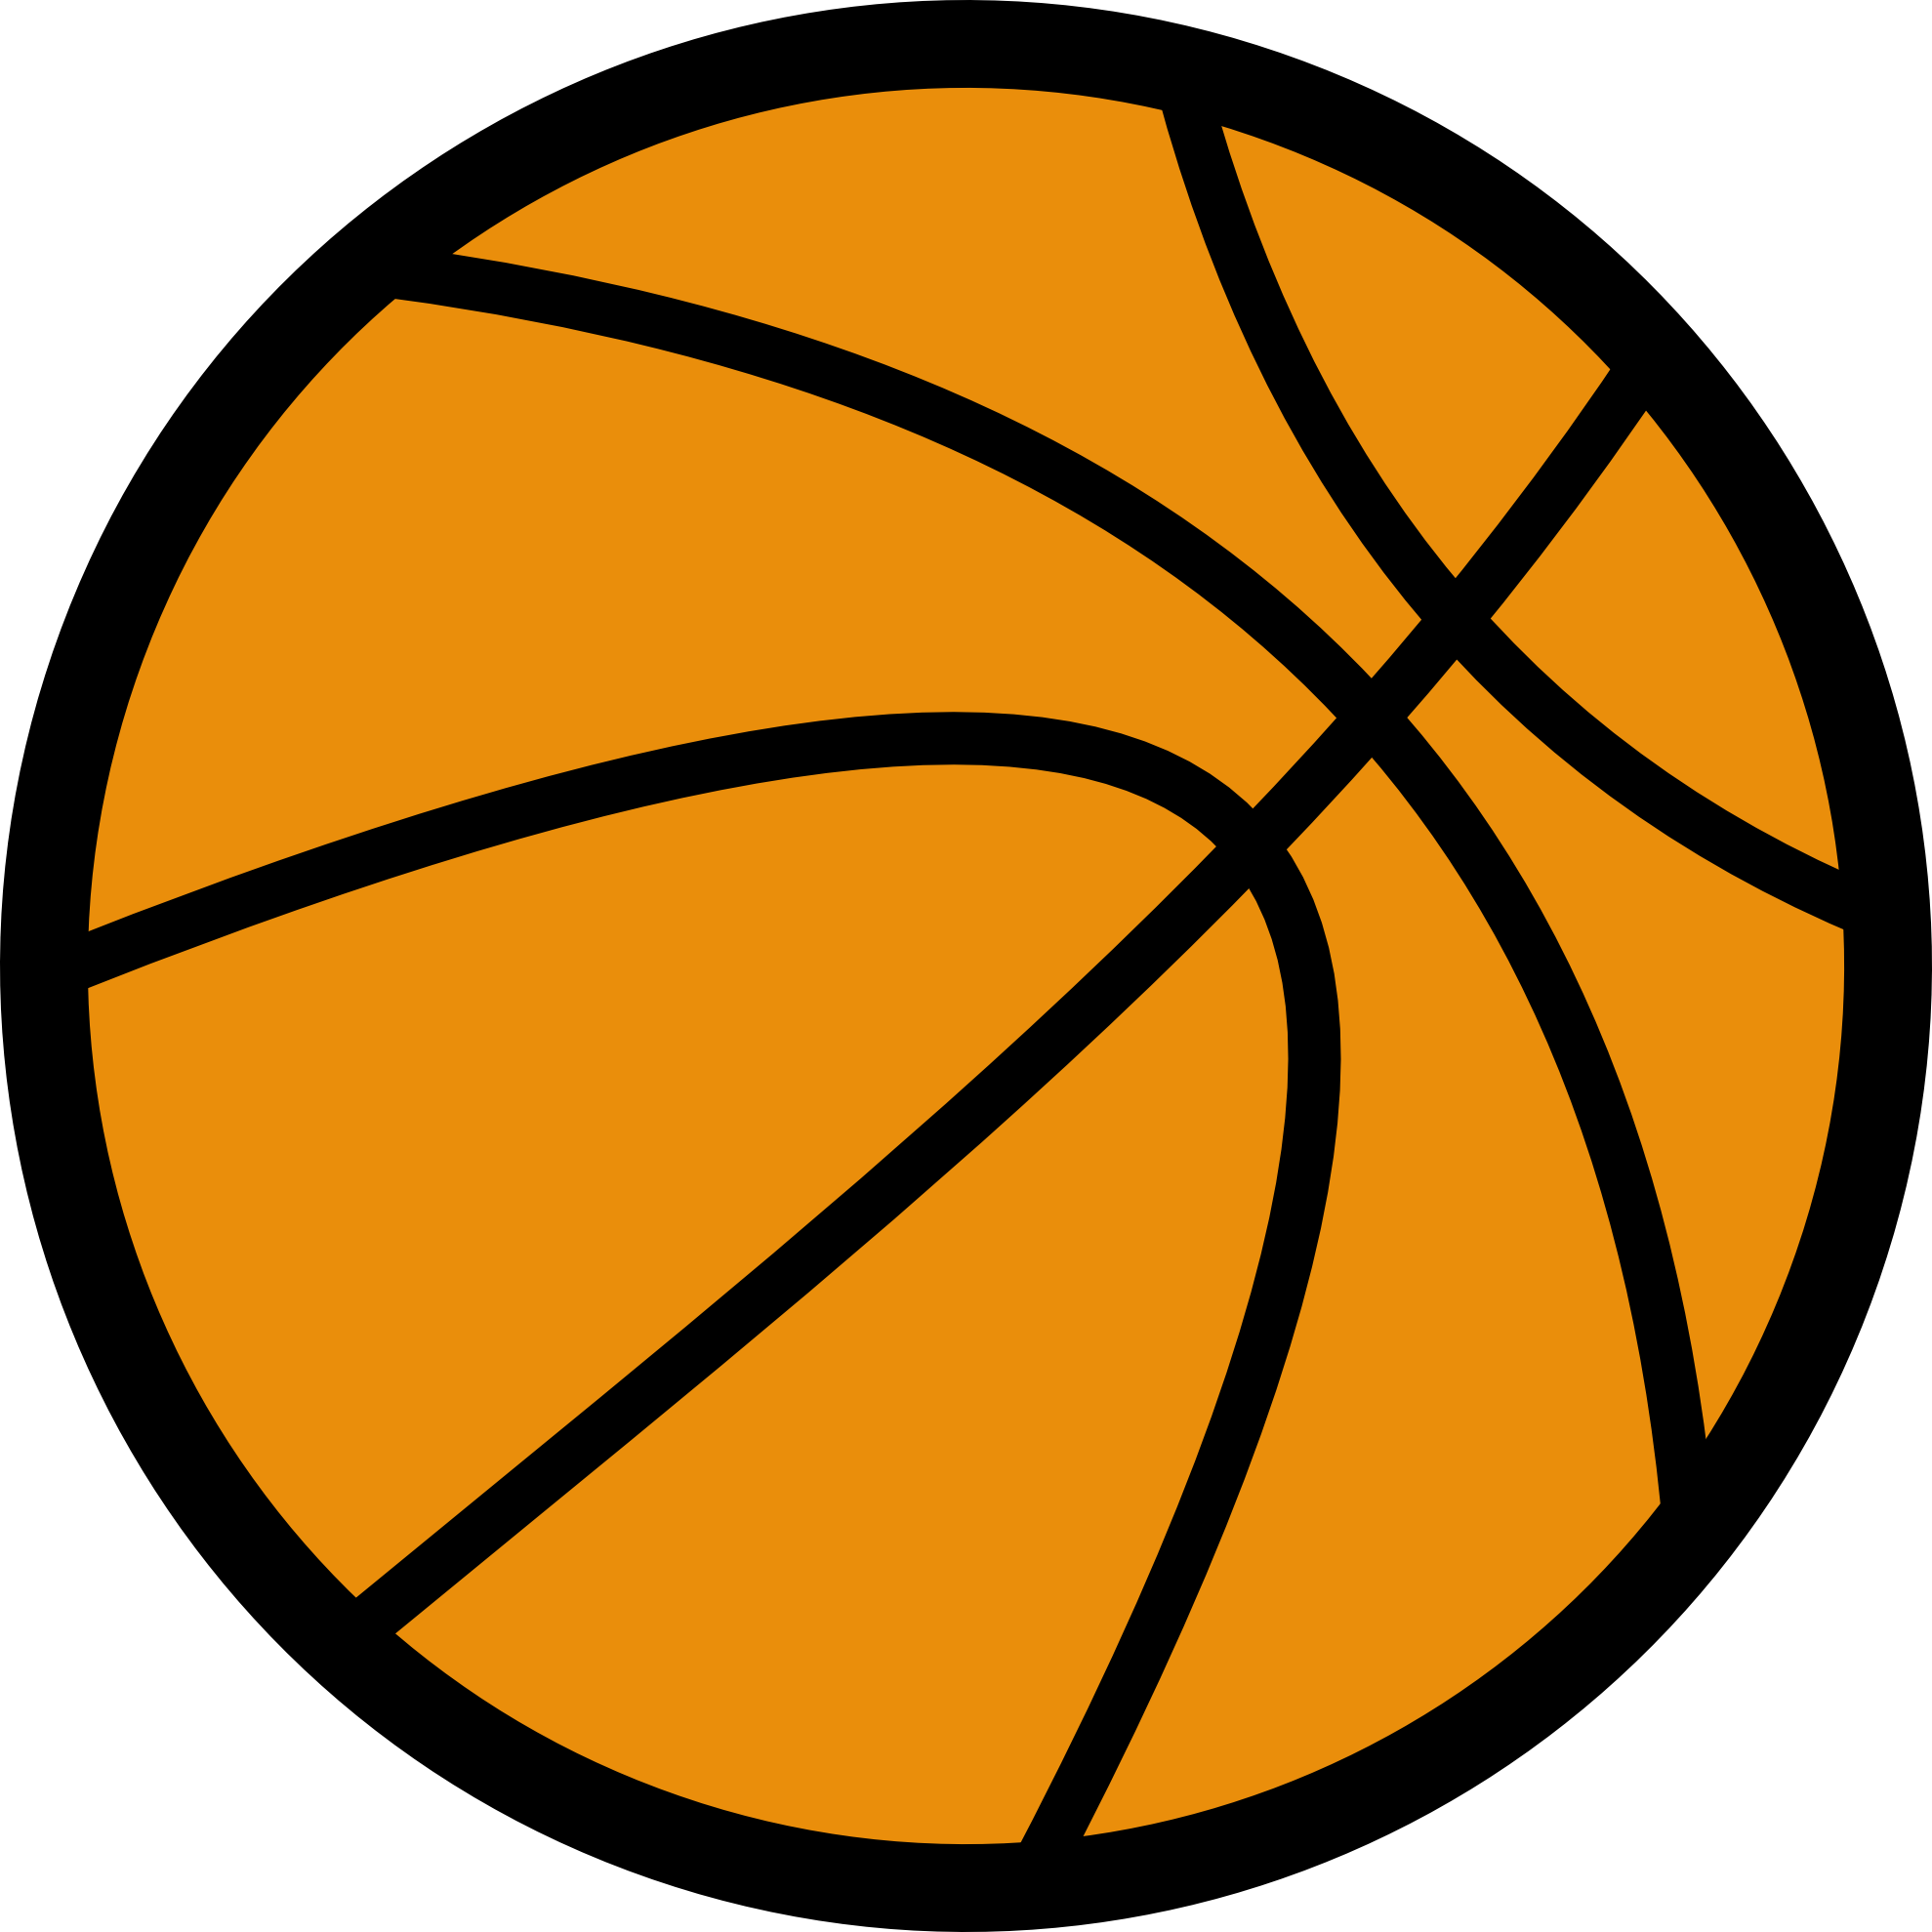 Picture Of A Basketball